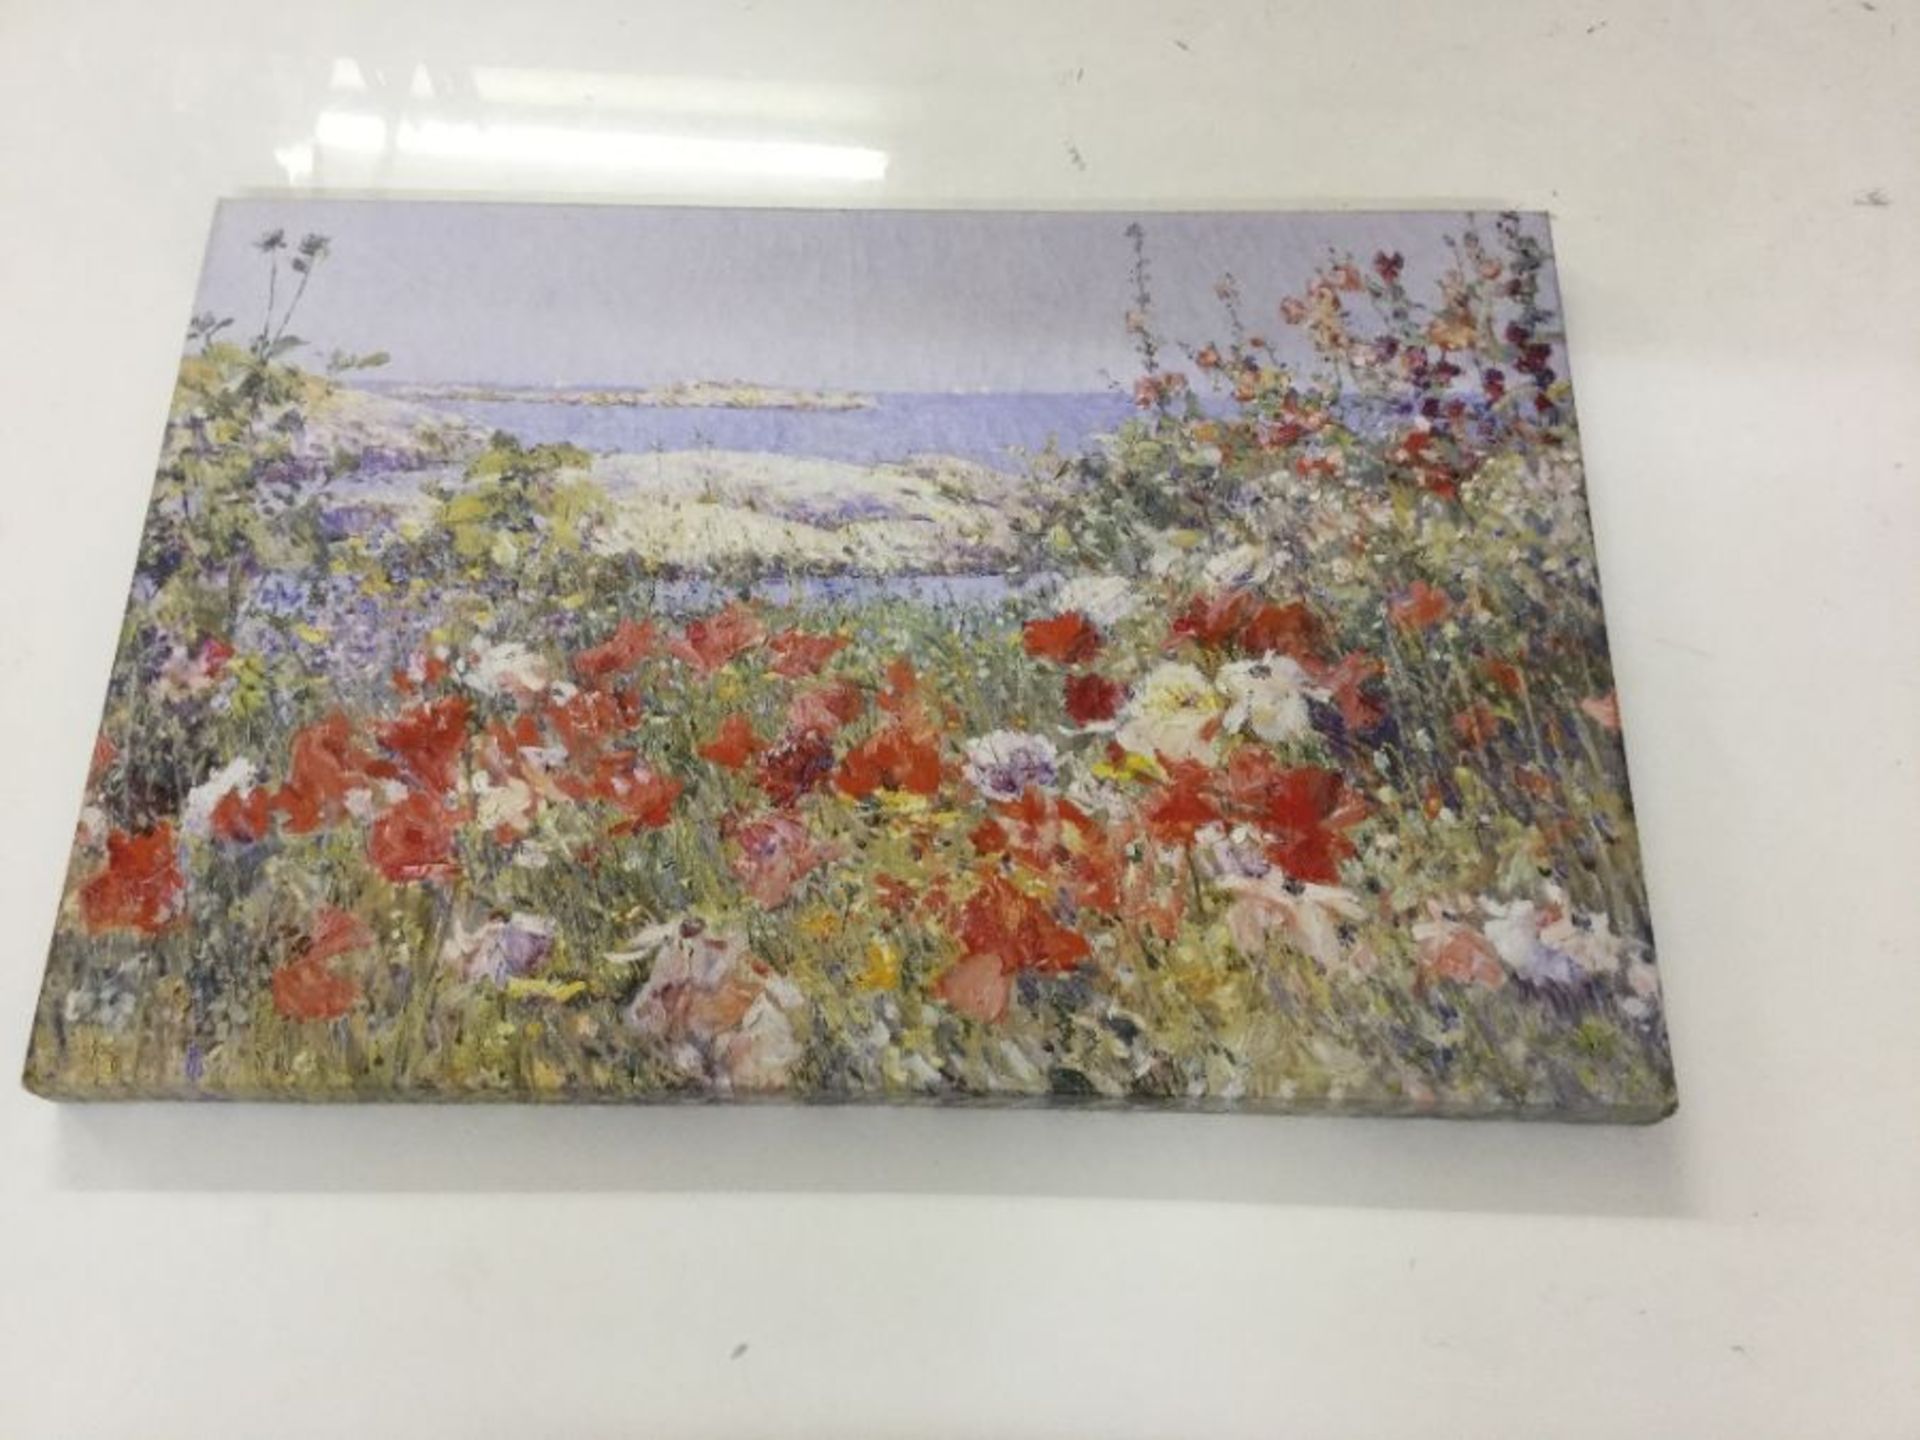 Big Box Art, 'Celia Thaxter's Garden' by Childe Hassam Painting Print on Canvas - RRP £40.99 (